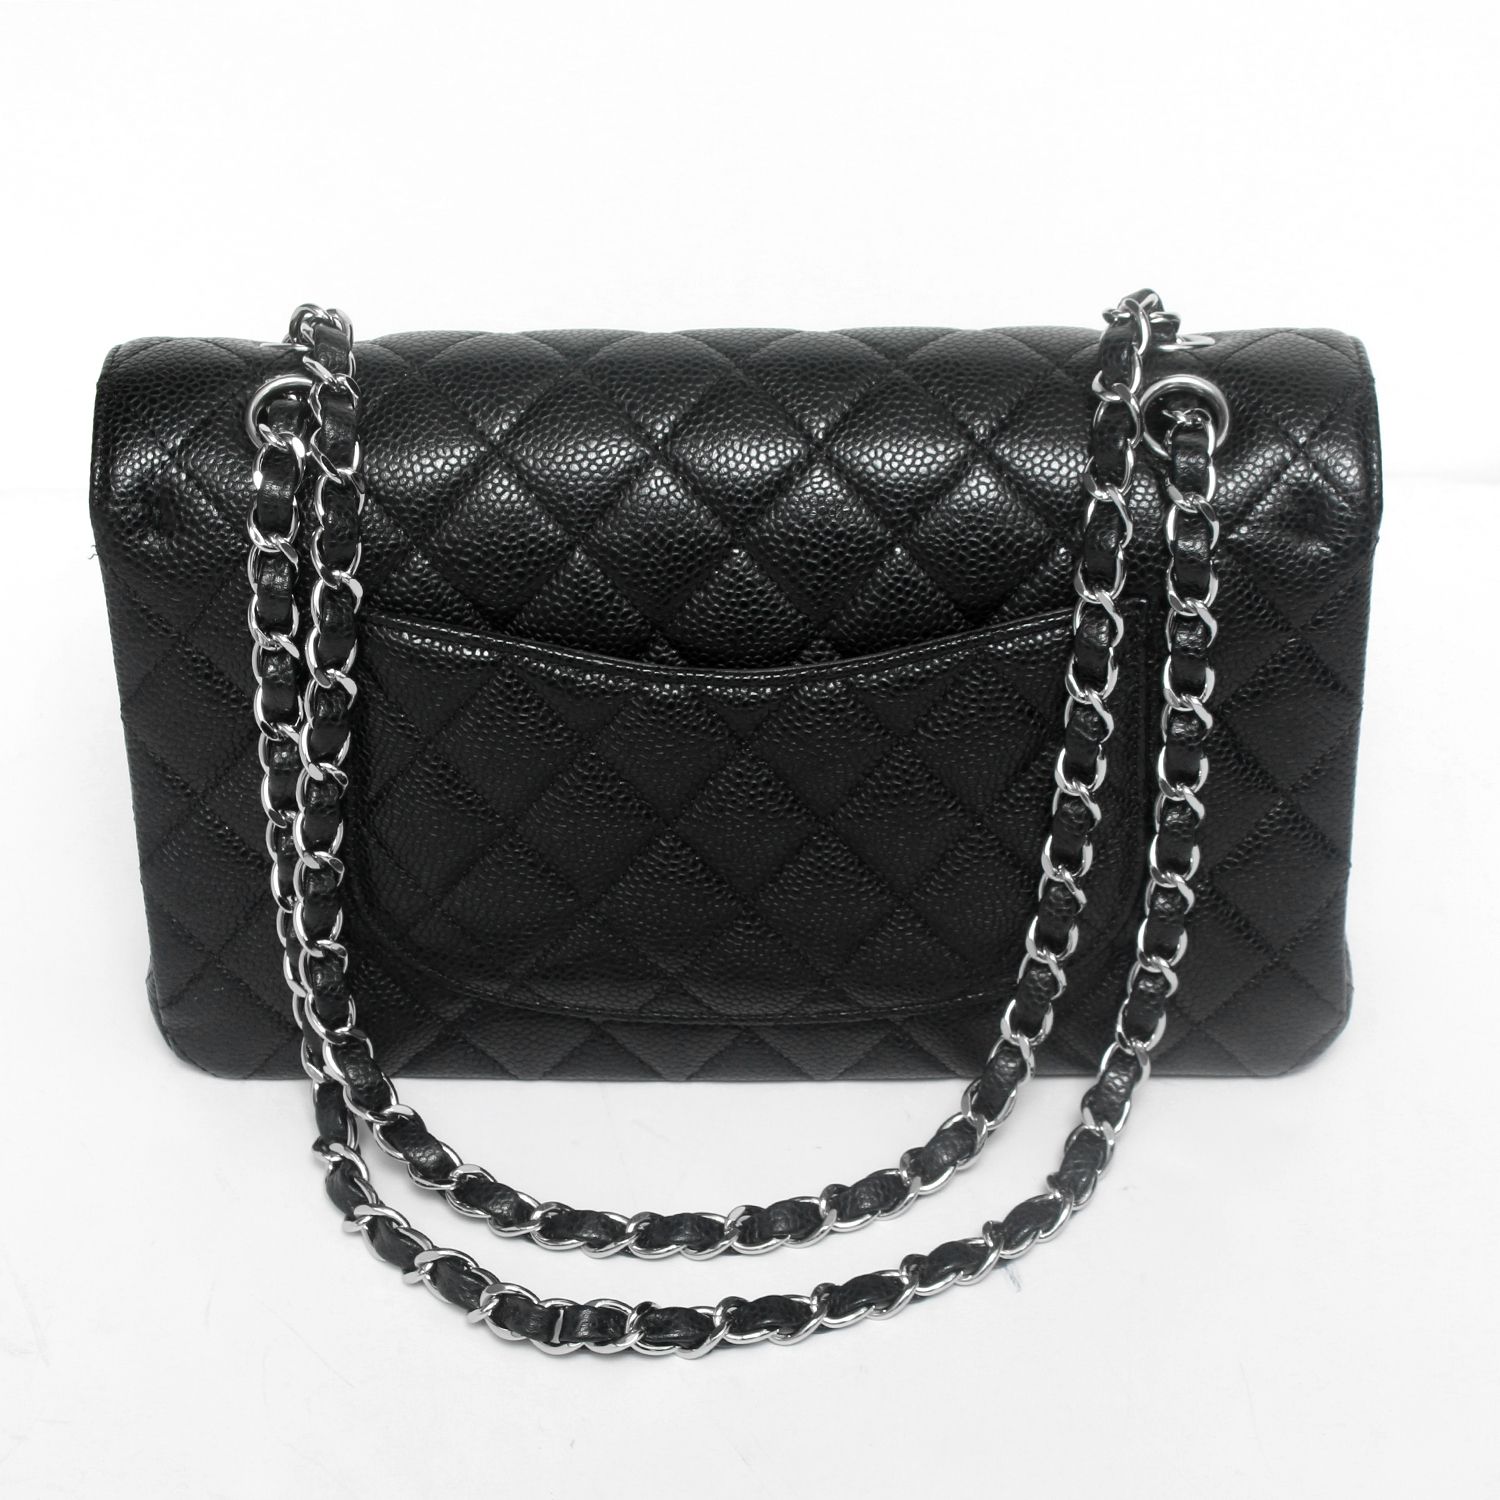 CHANEL, Bags, Chanel Caviar Quilted Medium Double Flap Black Shoulder Bag